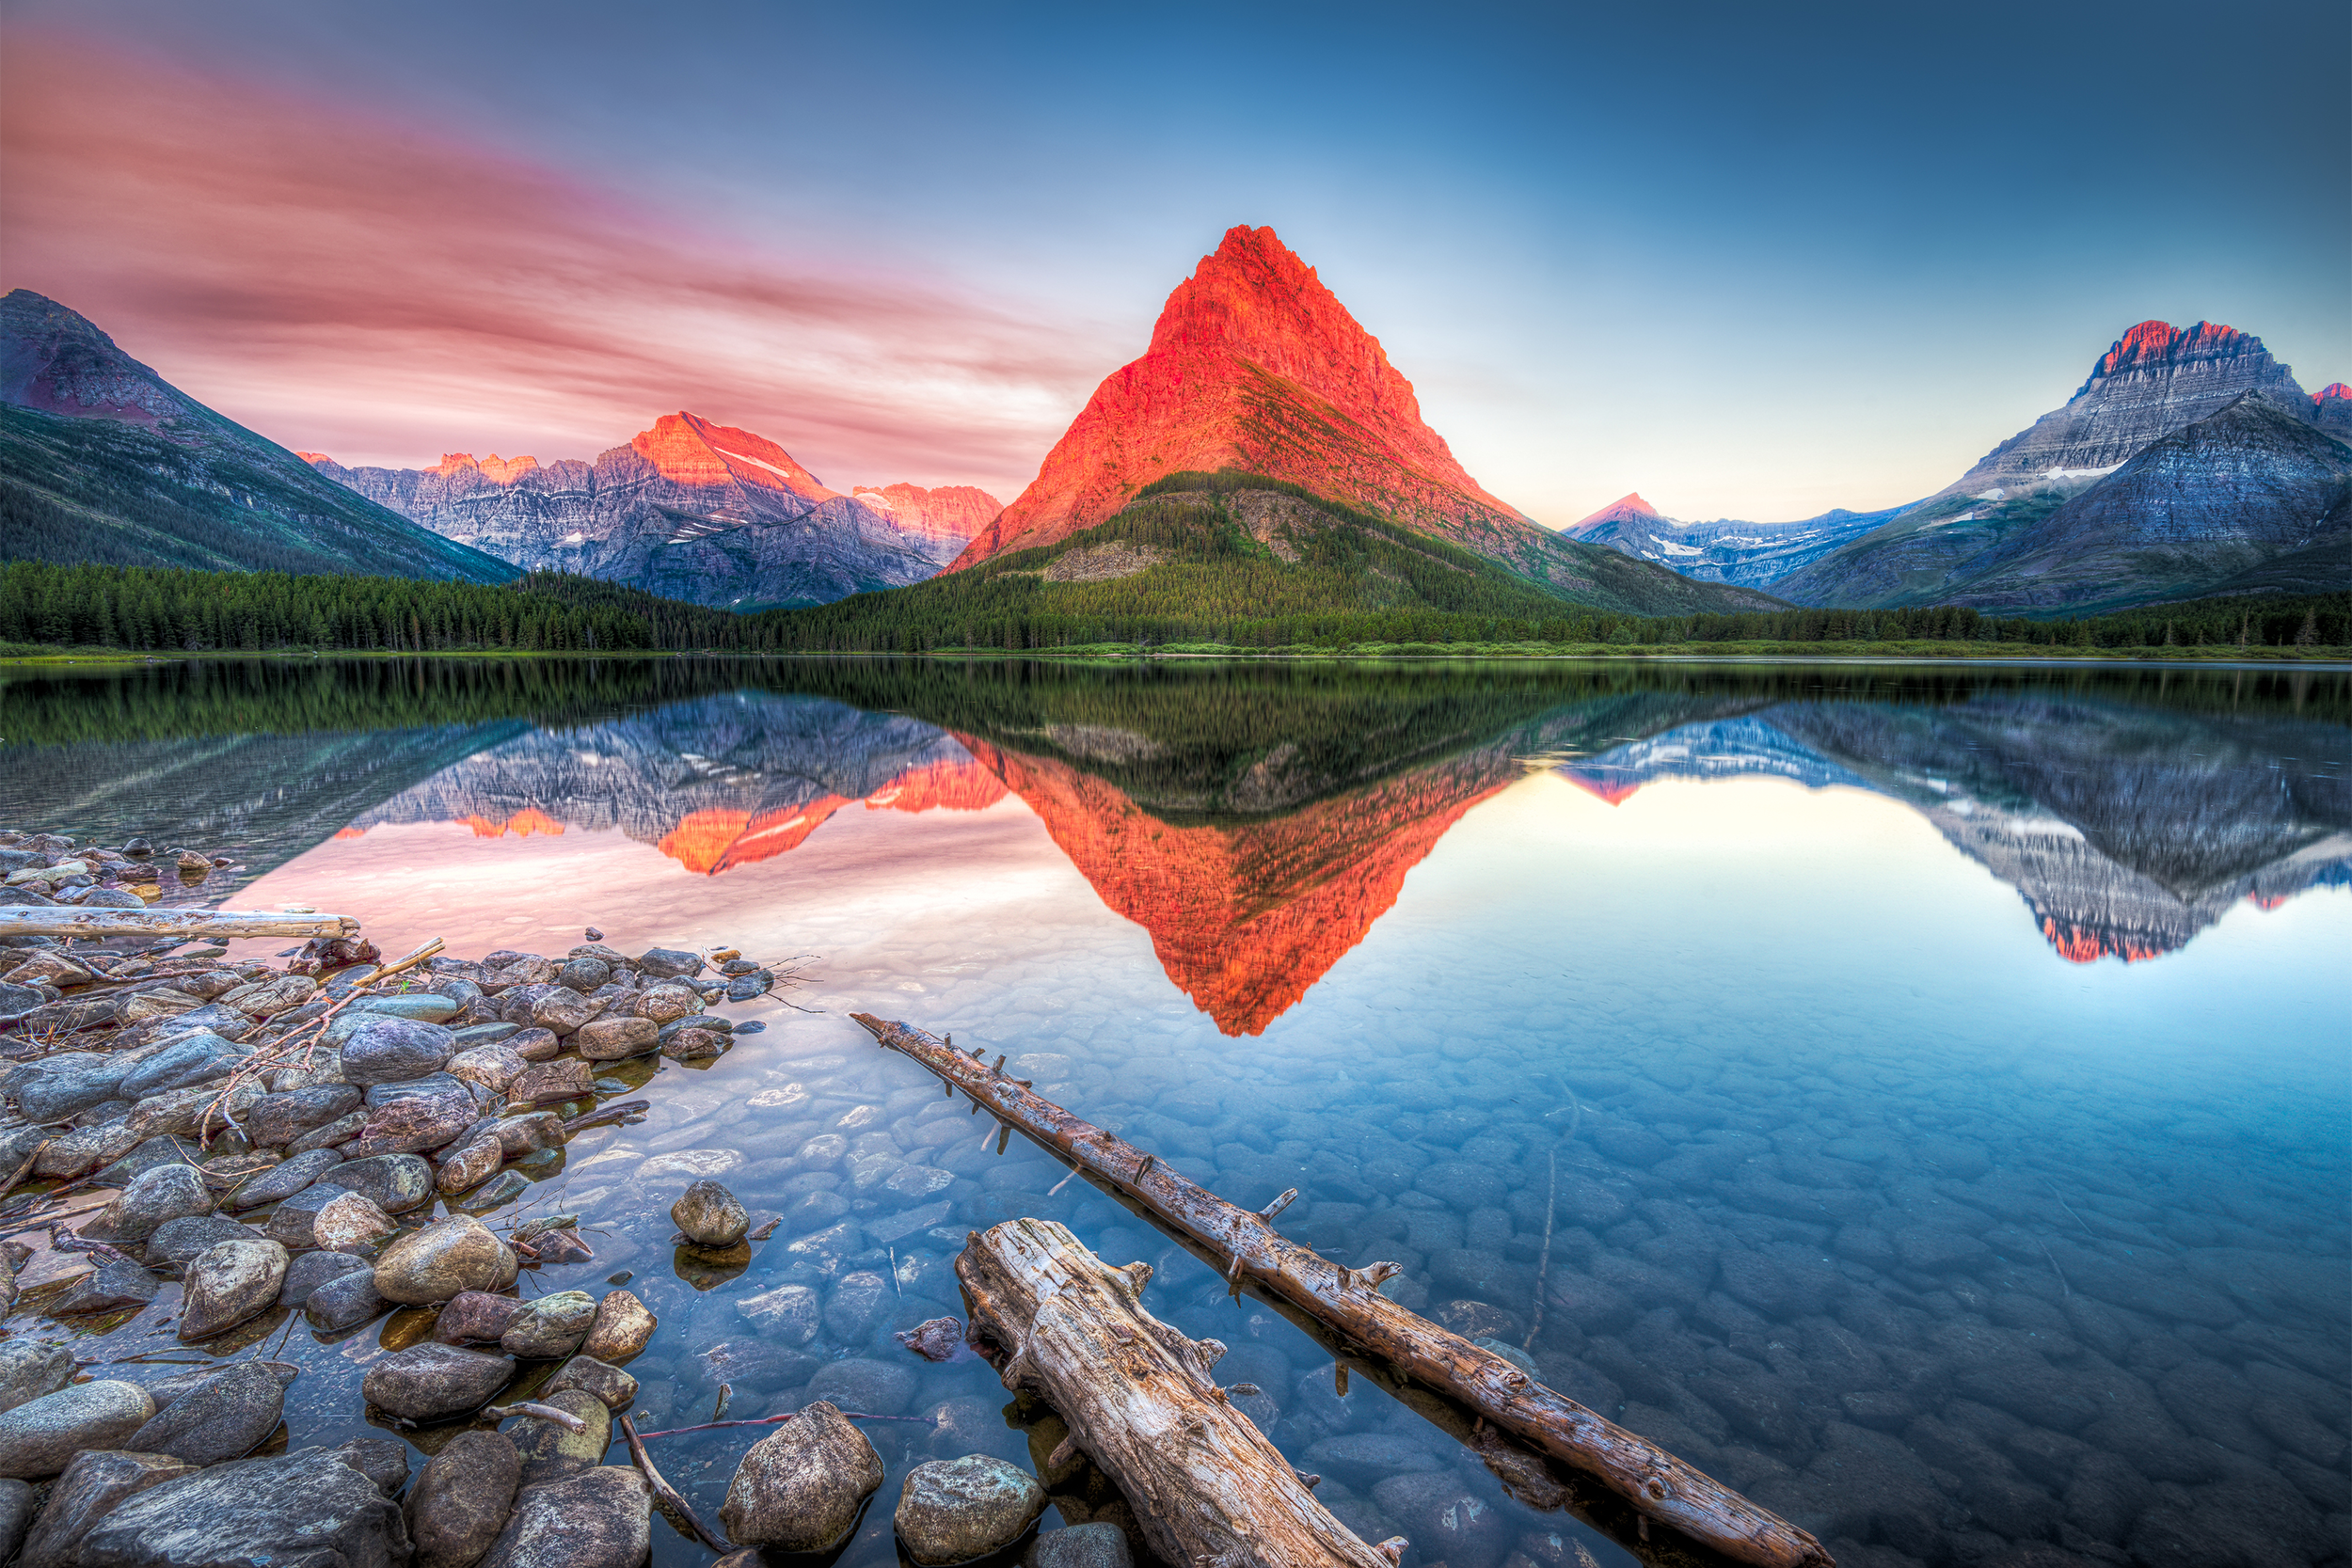 <p>The United States is home to <a href="https://blog.cheapism.com/best-national-parks-to-visit-14142/">62 stunning national parks</a> spread over 29 states. The oldest, Yellowstone National Park, was created by Ulysses S. Grant in 1872. The most recent addition, White Sands National Park, located in New Mexico, joined the club in December 2019. Each of the 60-plus parks offers uniquely awe-inspiring wild places. Individually and collectively, they represent the best of America’s natural beauty, and offer visitors both a place for spiritual renewal and the chance to get lost in the splendor of the great outdoors. Even when we can't visit the parks in person, we can still enjoy stunning photos of them from afar. (Curious to see what our parks looked like decades ago? Be sure to check out <a href="https://blog.cheapism.com/vintage-national-park-photos/">33 Historic National Park Photos for Vintage Views</a>.)</p>